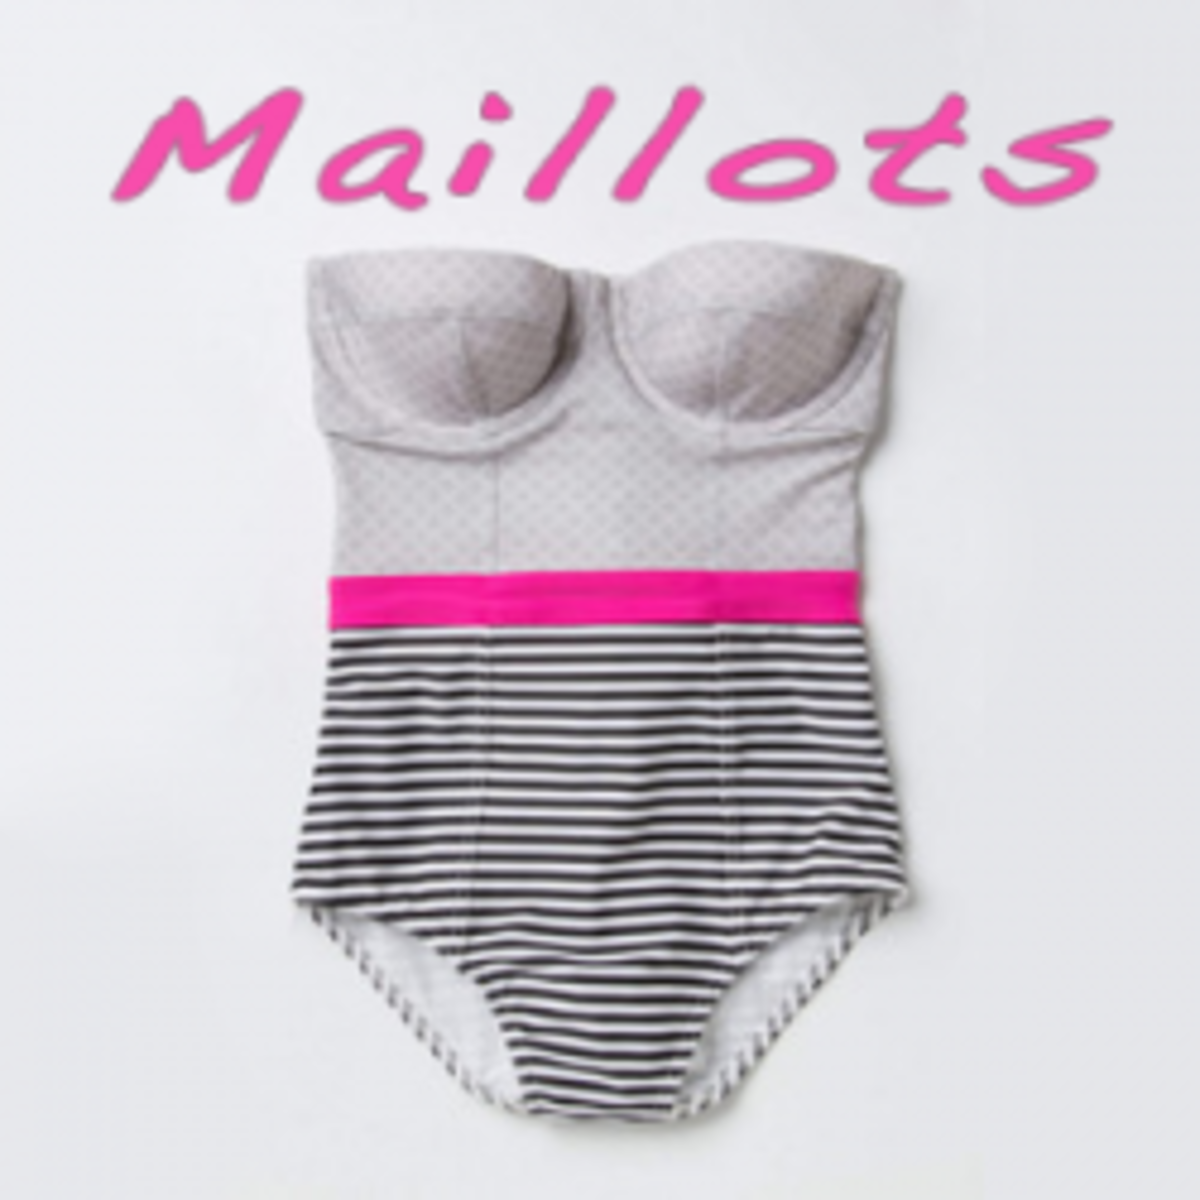 5 Types of Maillot Swimsuits Every Lady Should Own